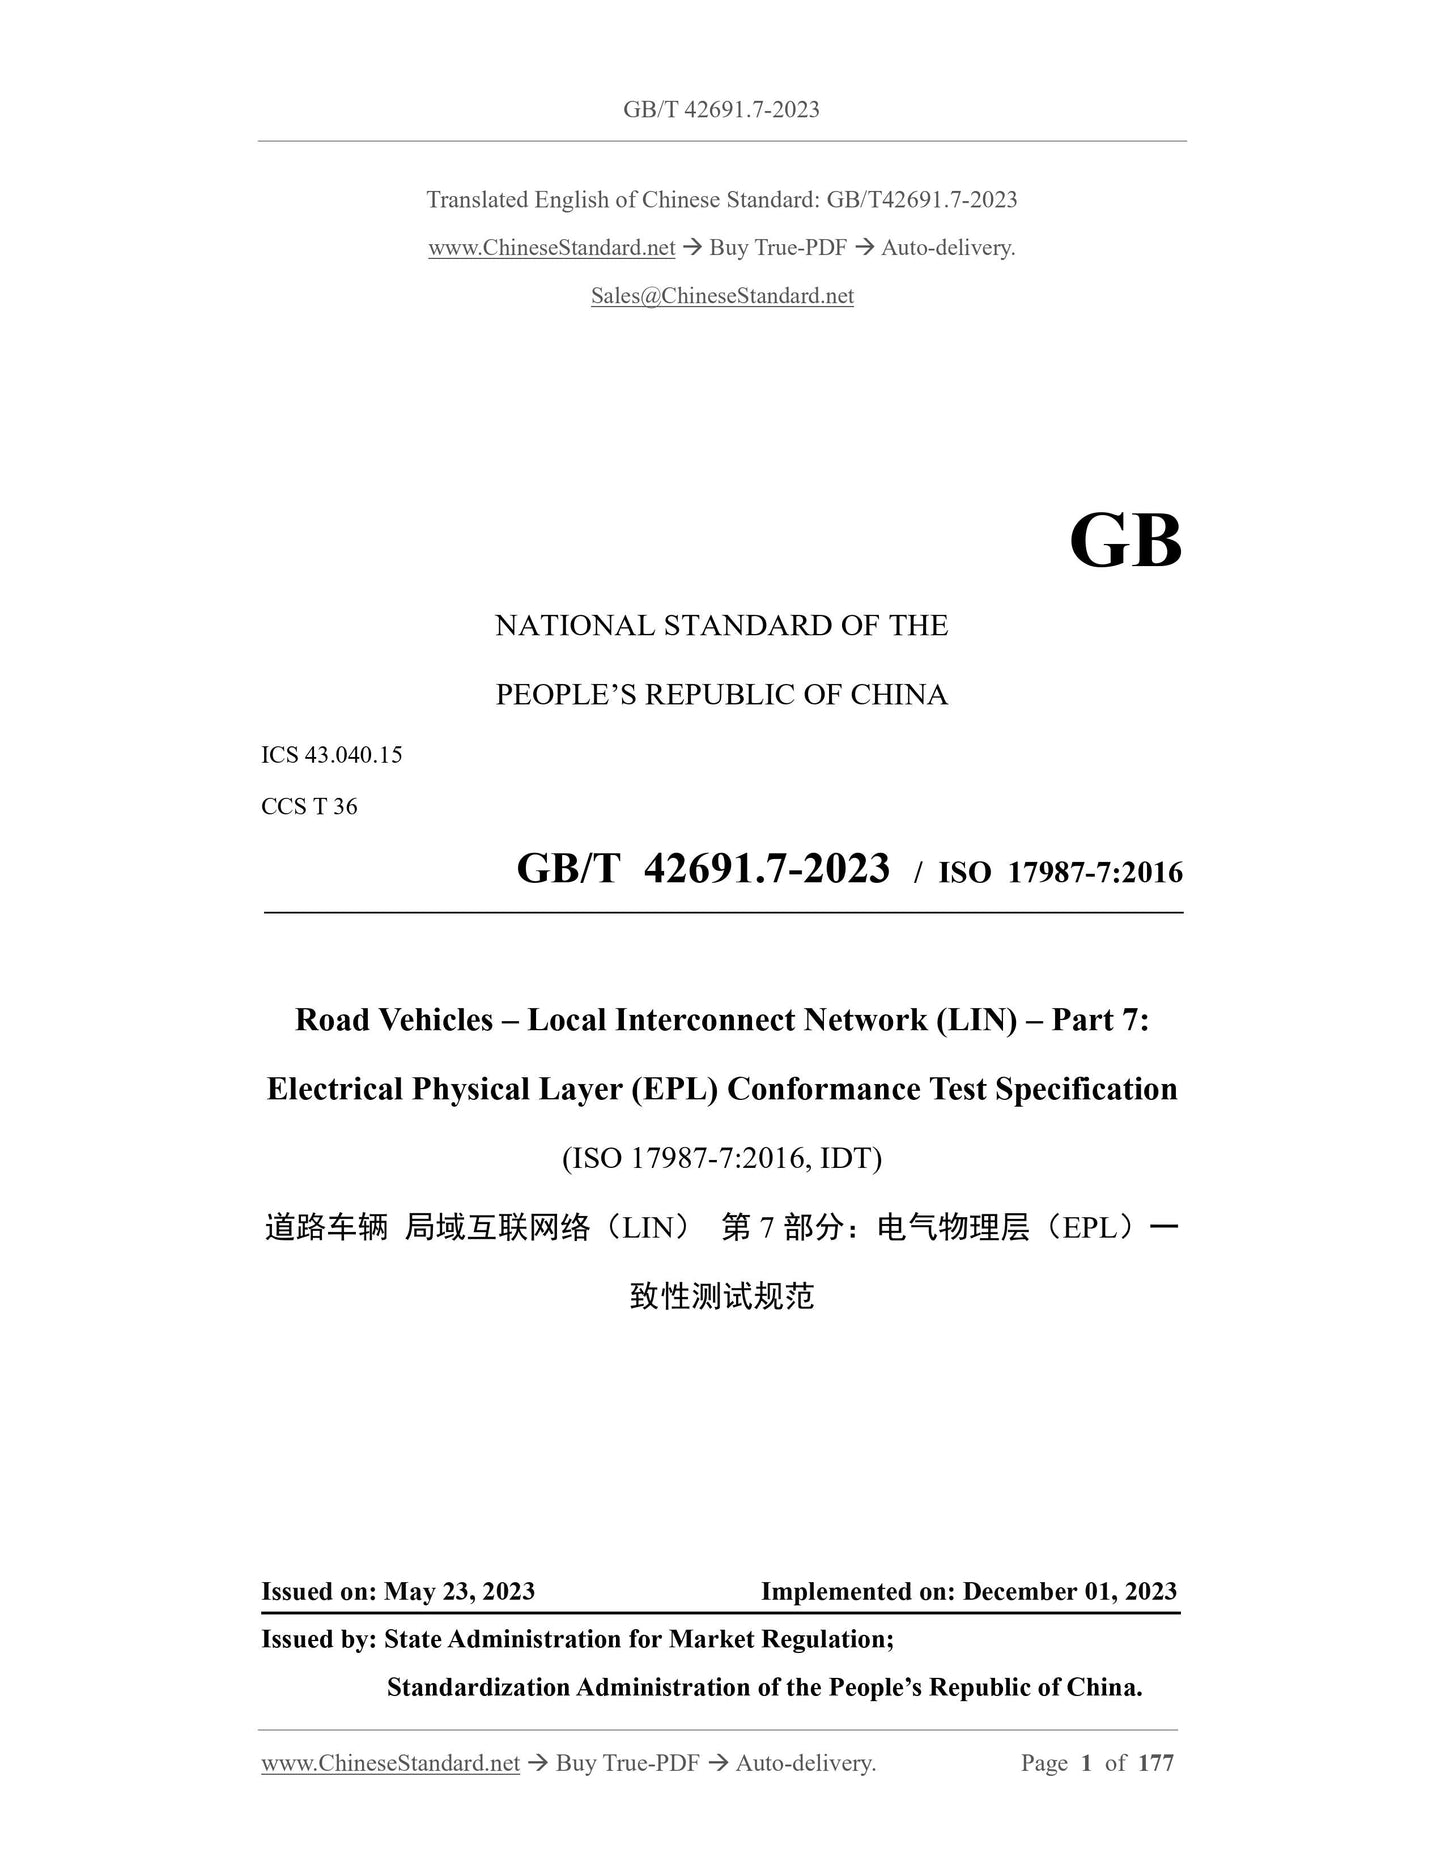 GB/T 42691.7-2023 Page 1